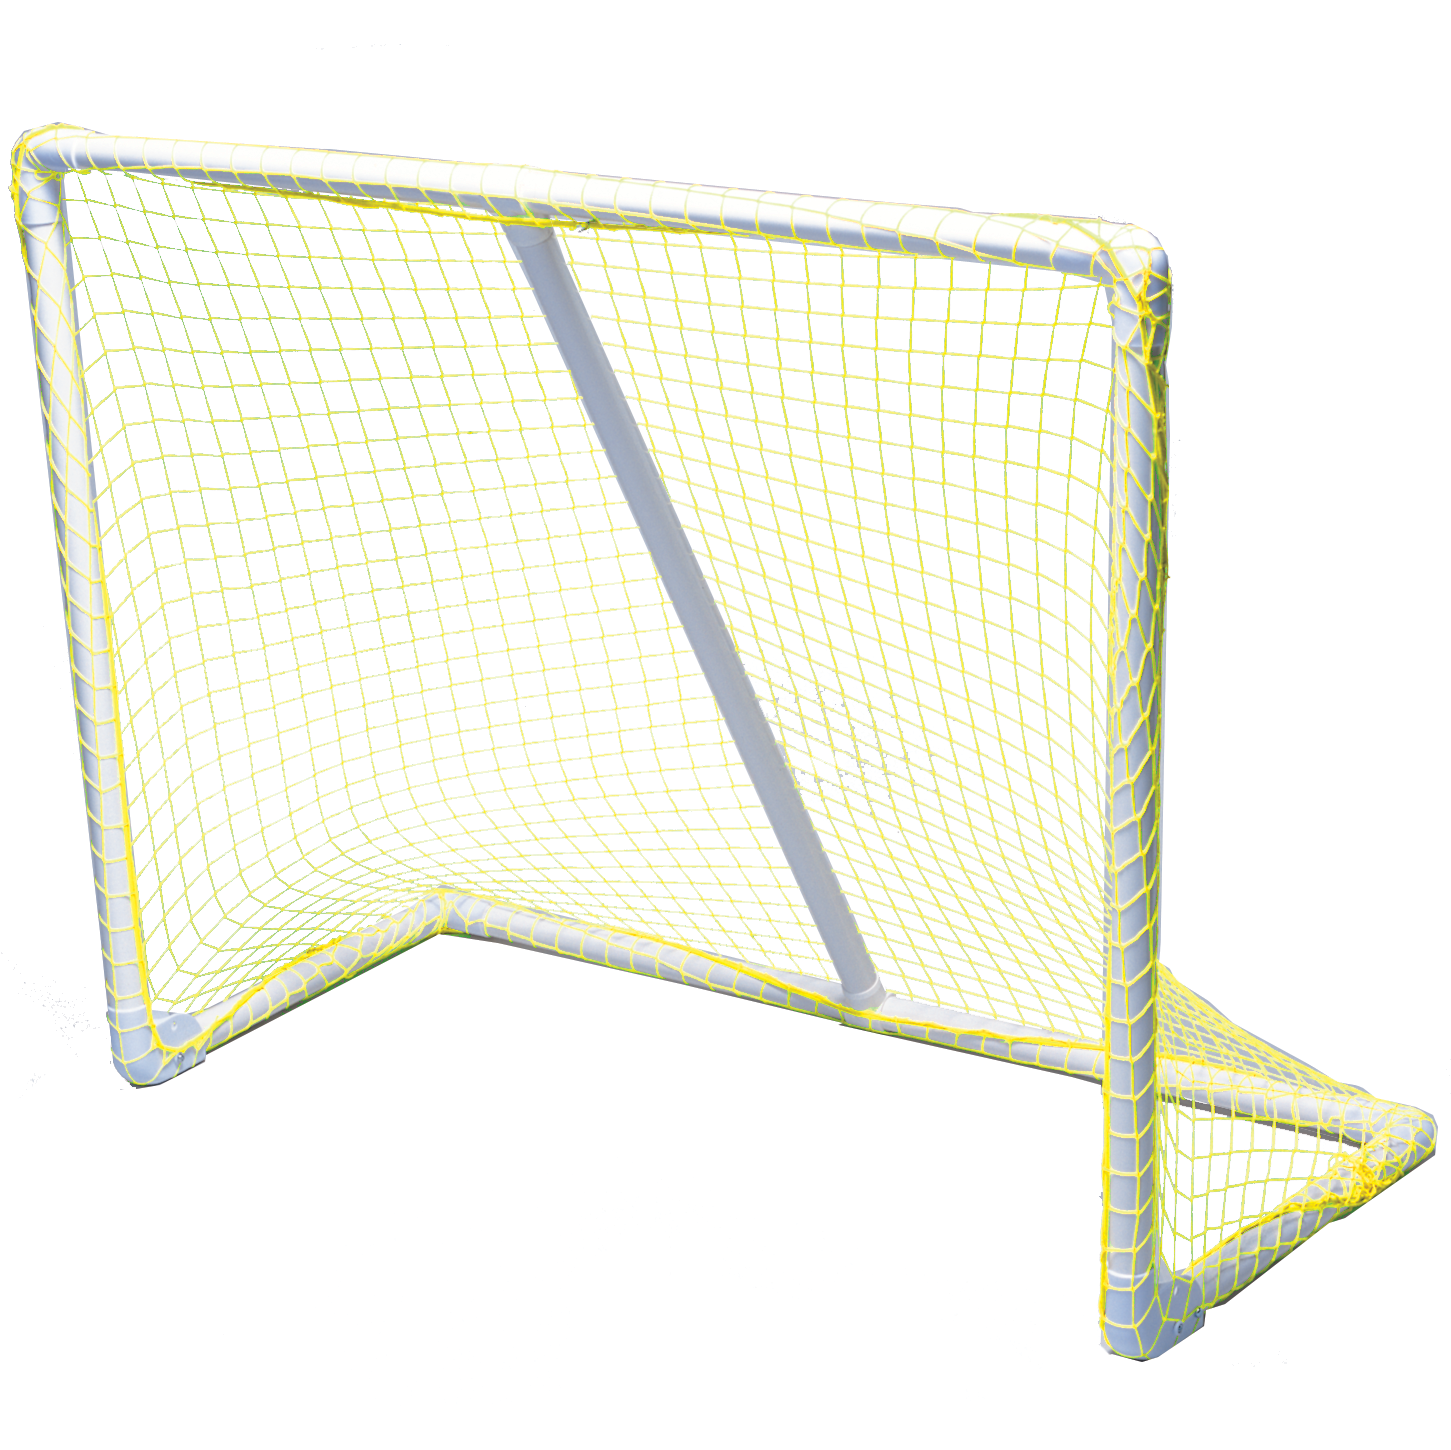 Park and Sports PVC Sports Goal